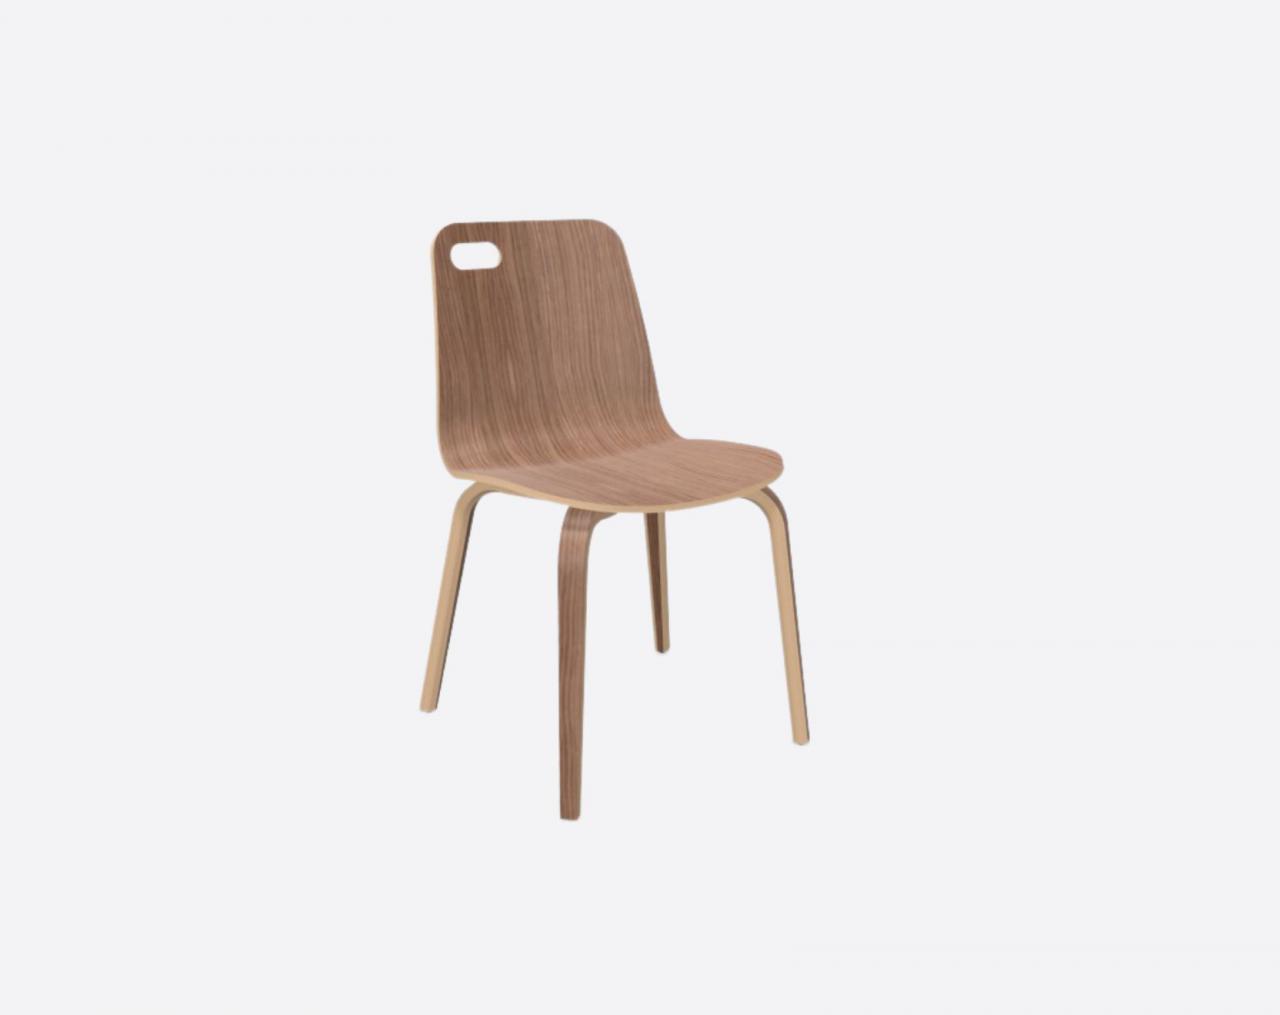 PATROL walnut chair - Sophisticated and comfortable chair for any interior.